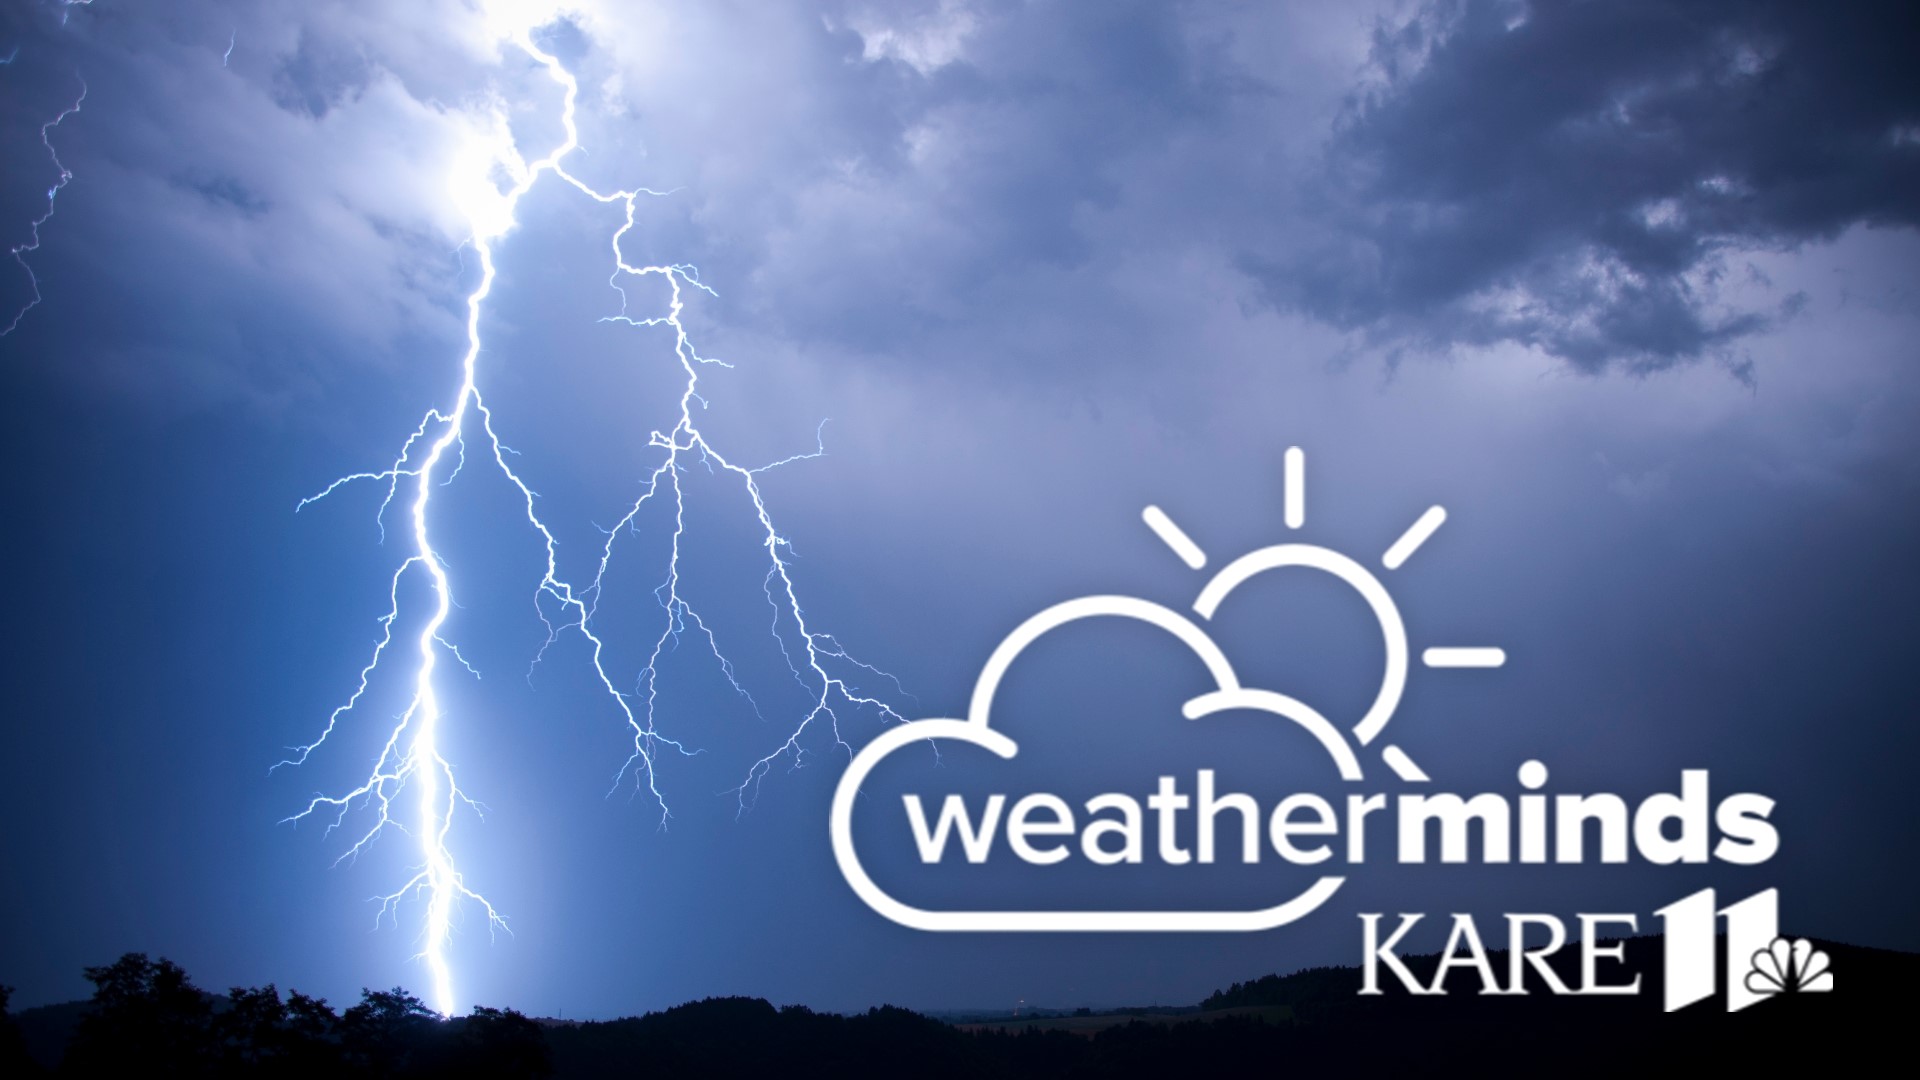 KARE 11 WeatherMinds meteorologists explain the science behind storms, and how to stay safe during severe weather season.